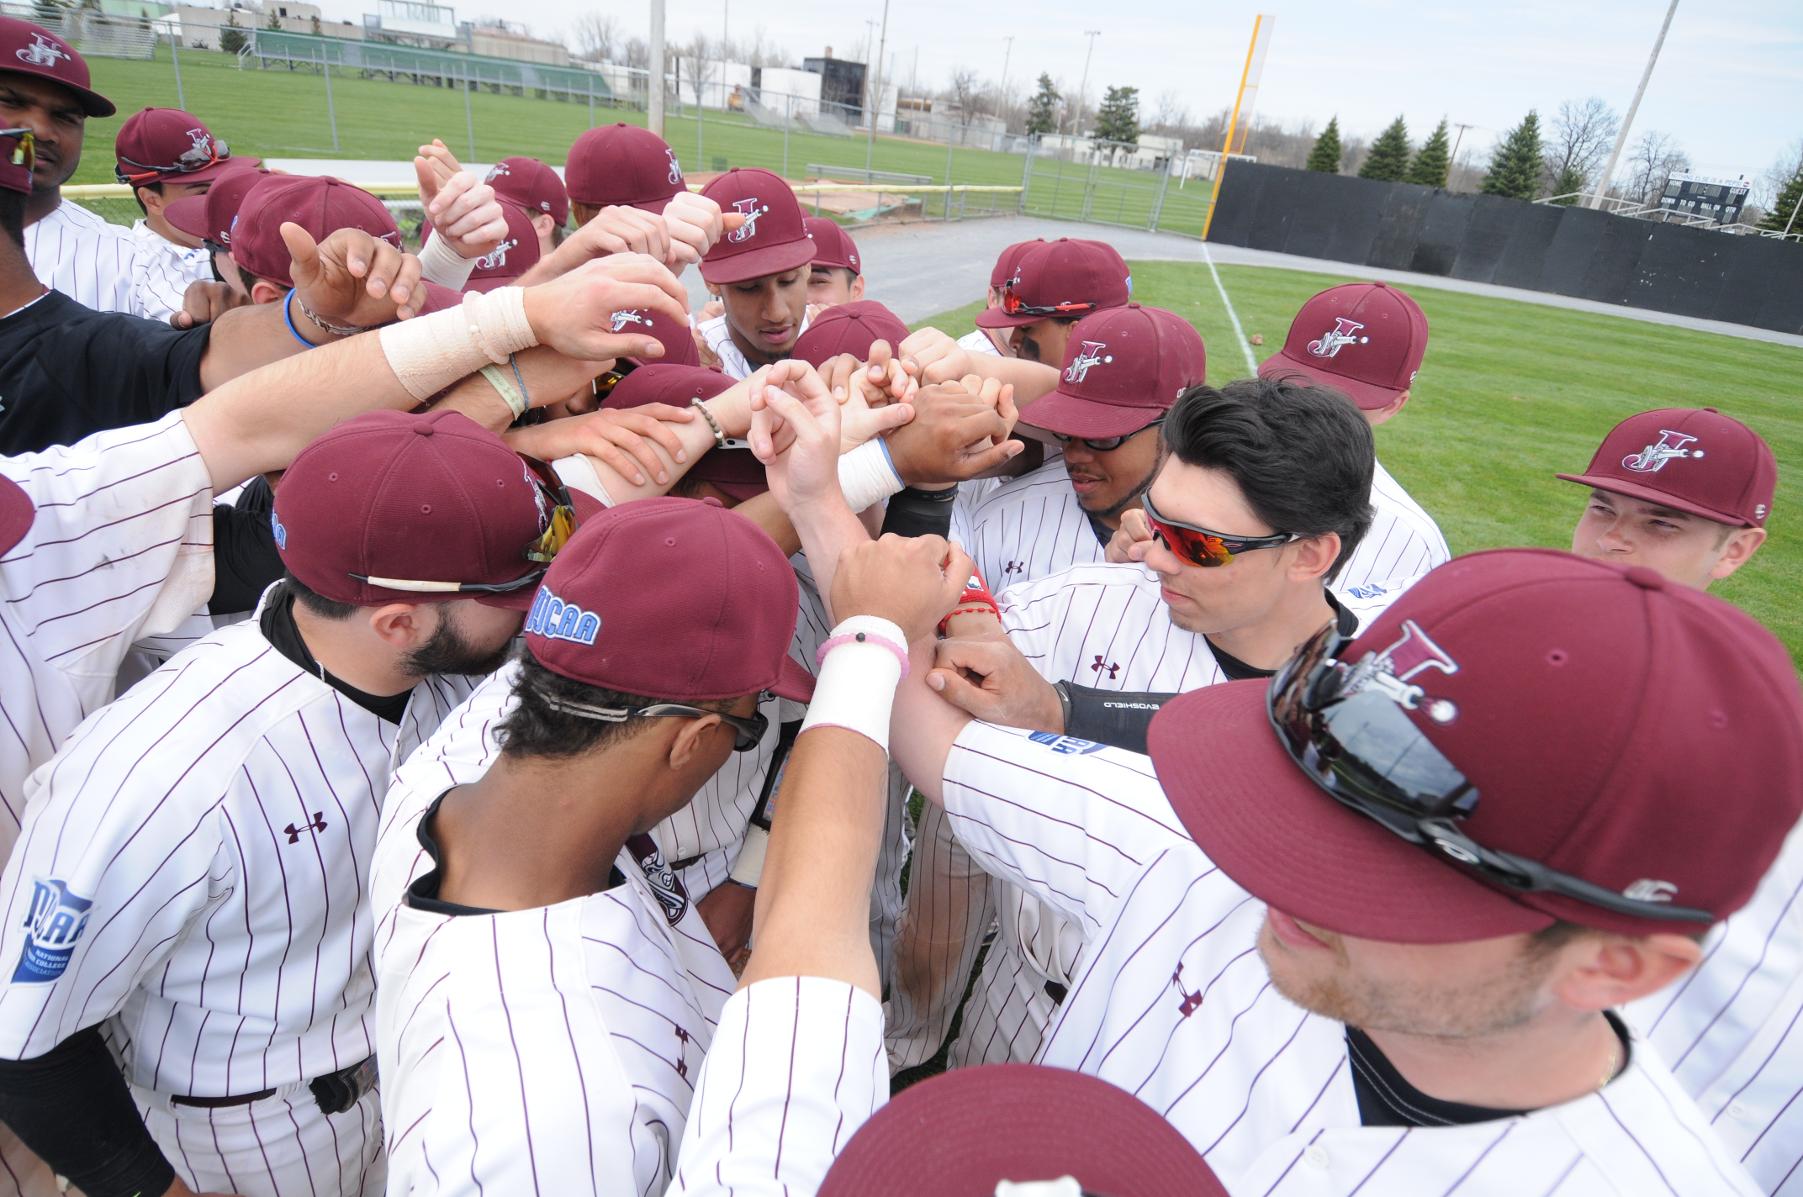 Cannoneers sweep 3rd ranked Region III Eastern Division opponent Hudson Valley